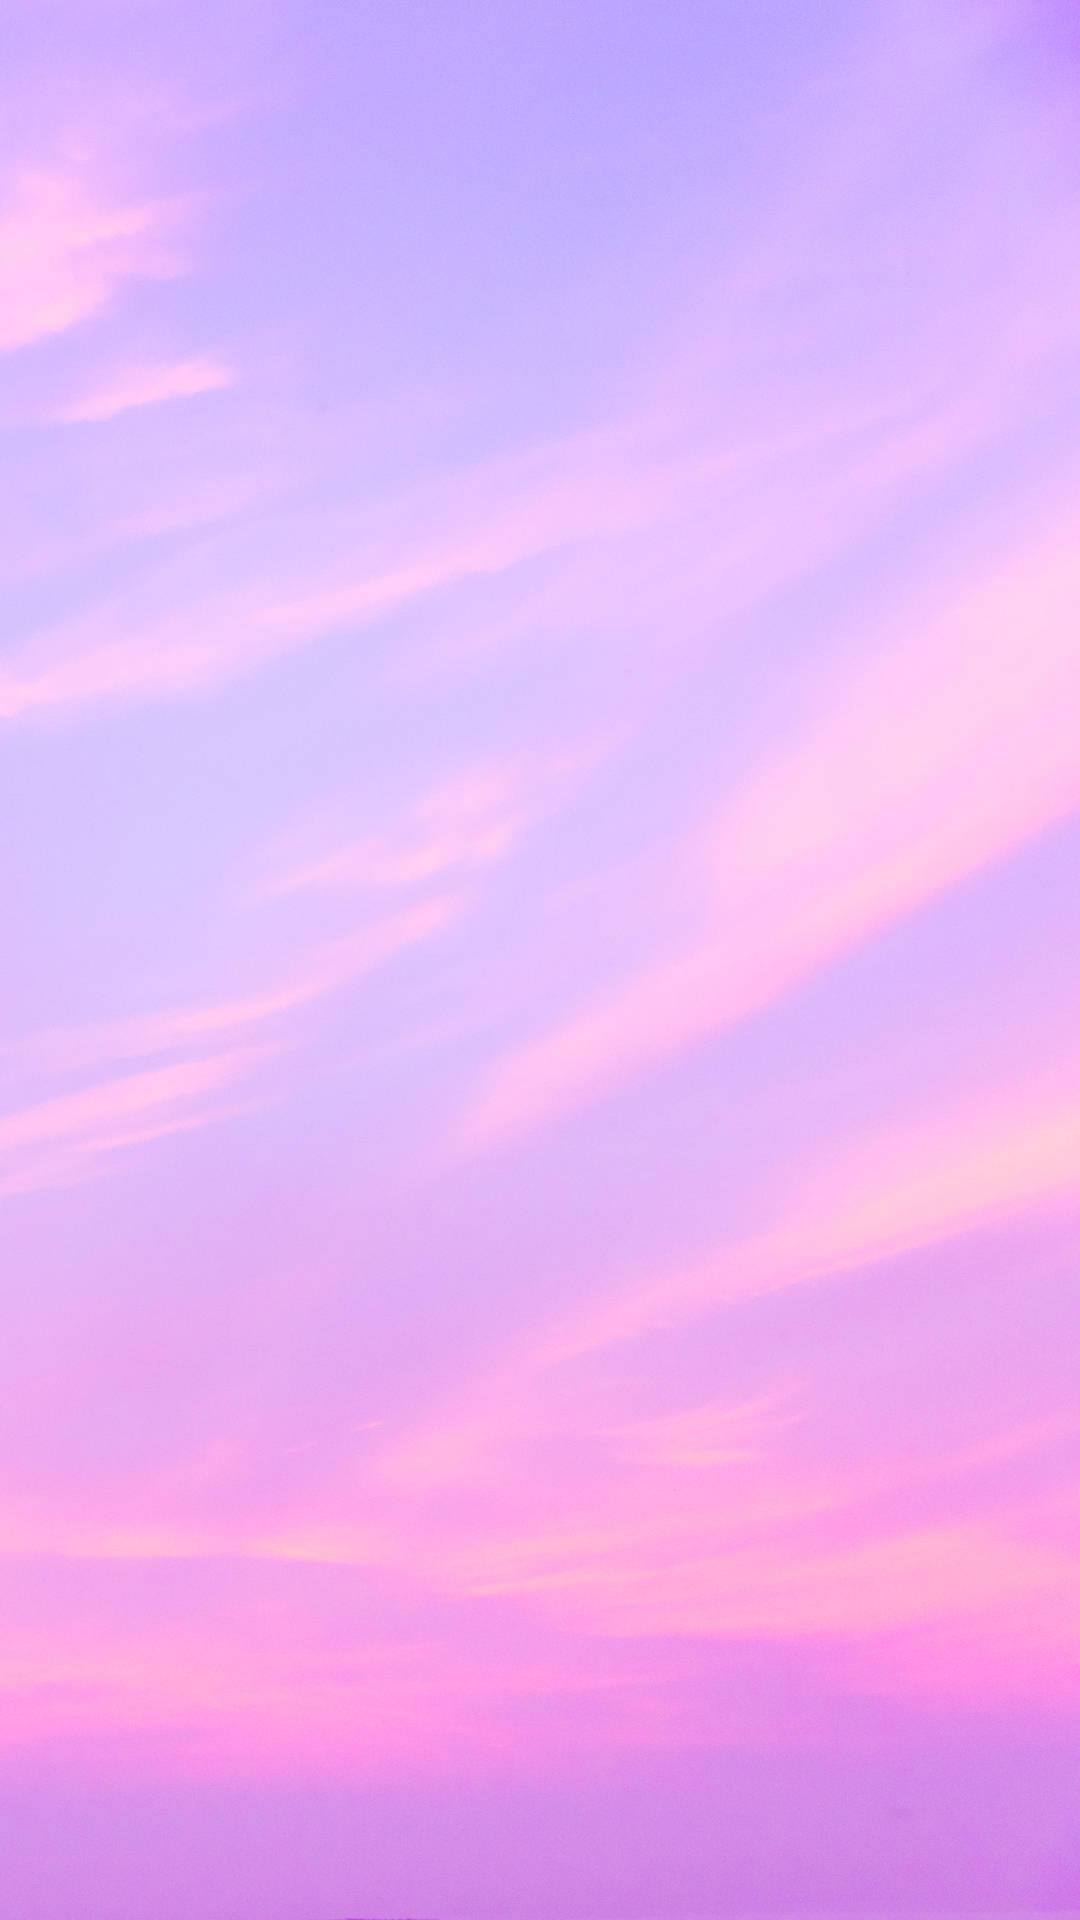 Aesthetic Pink Iphone Wallpapers